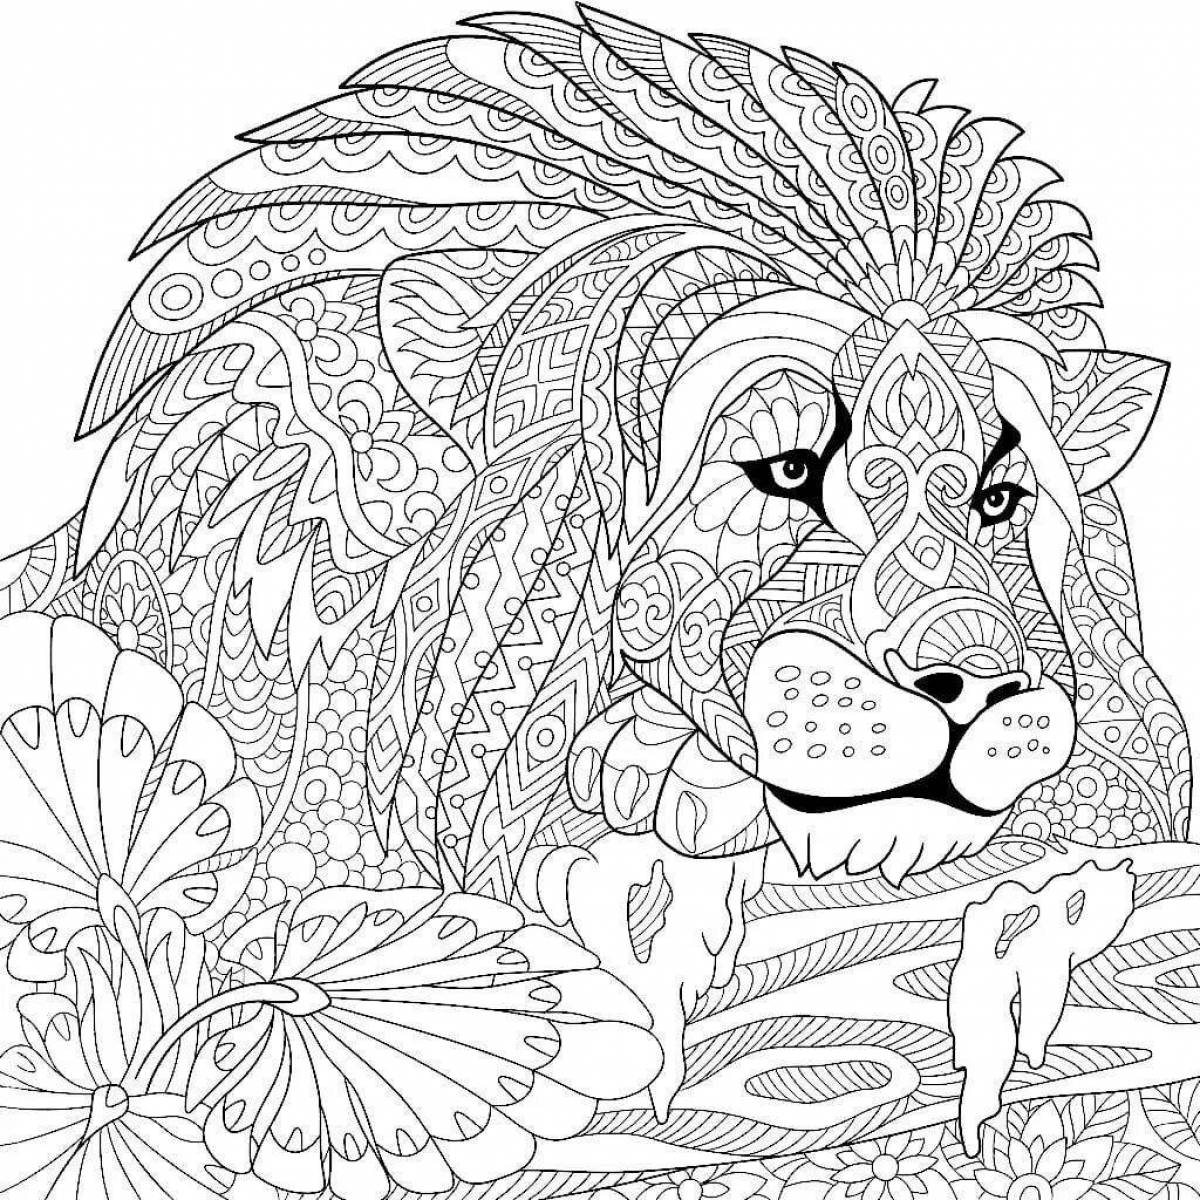 Coloring pages animals for children 10-12 years old